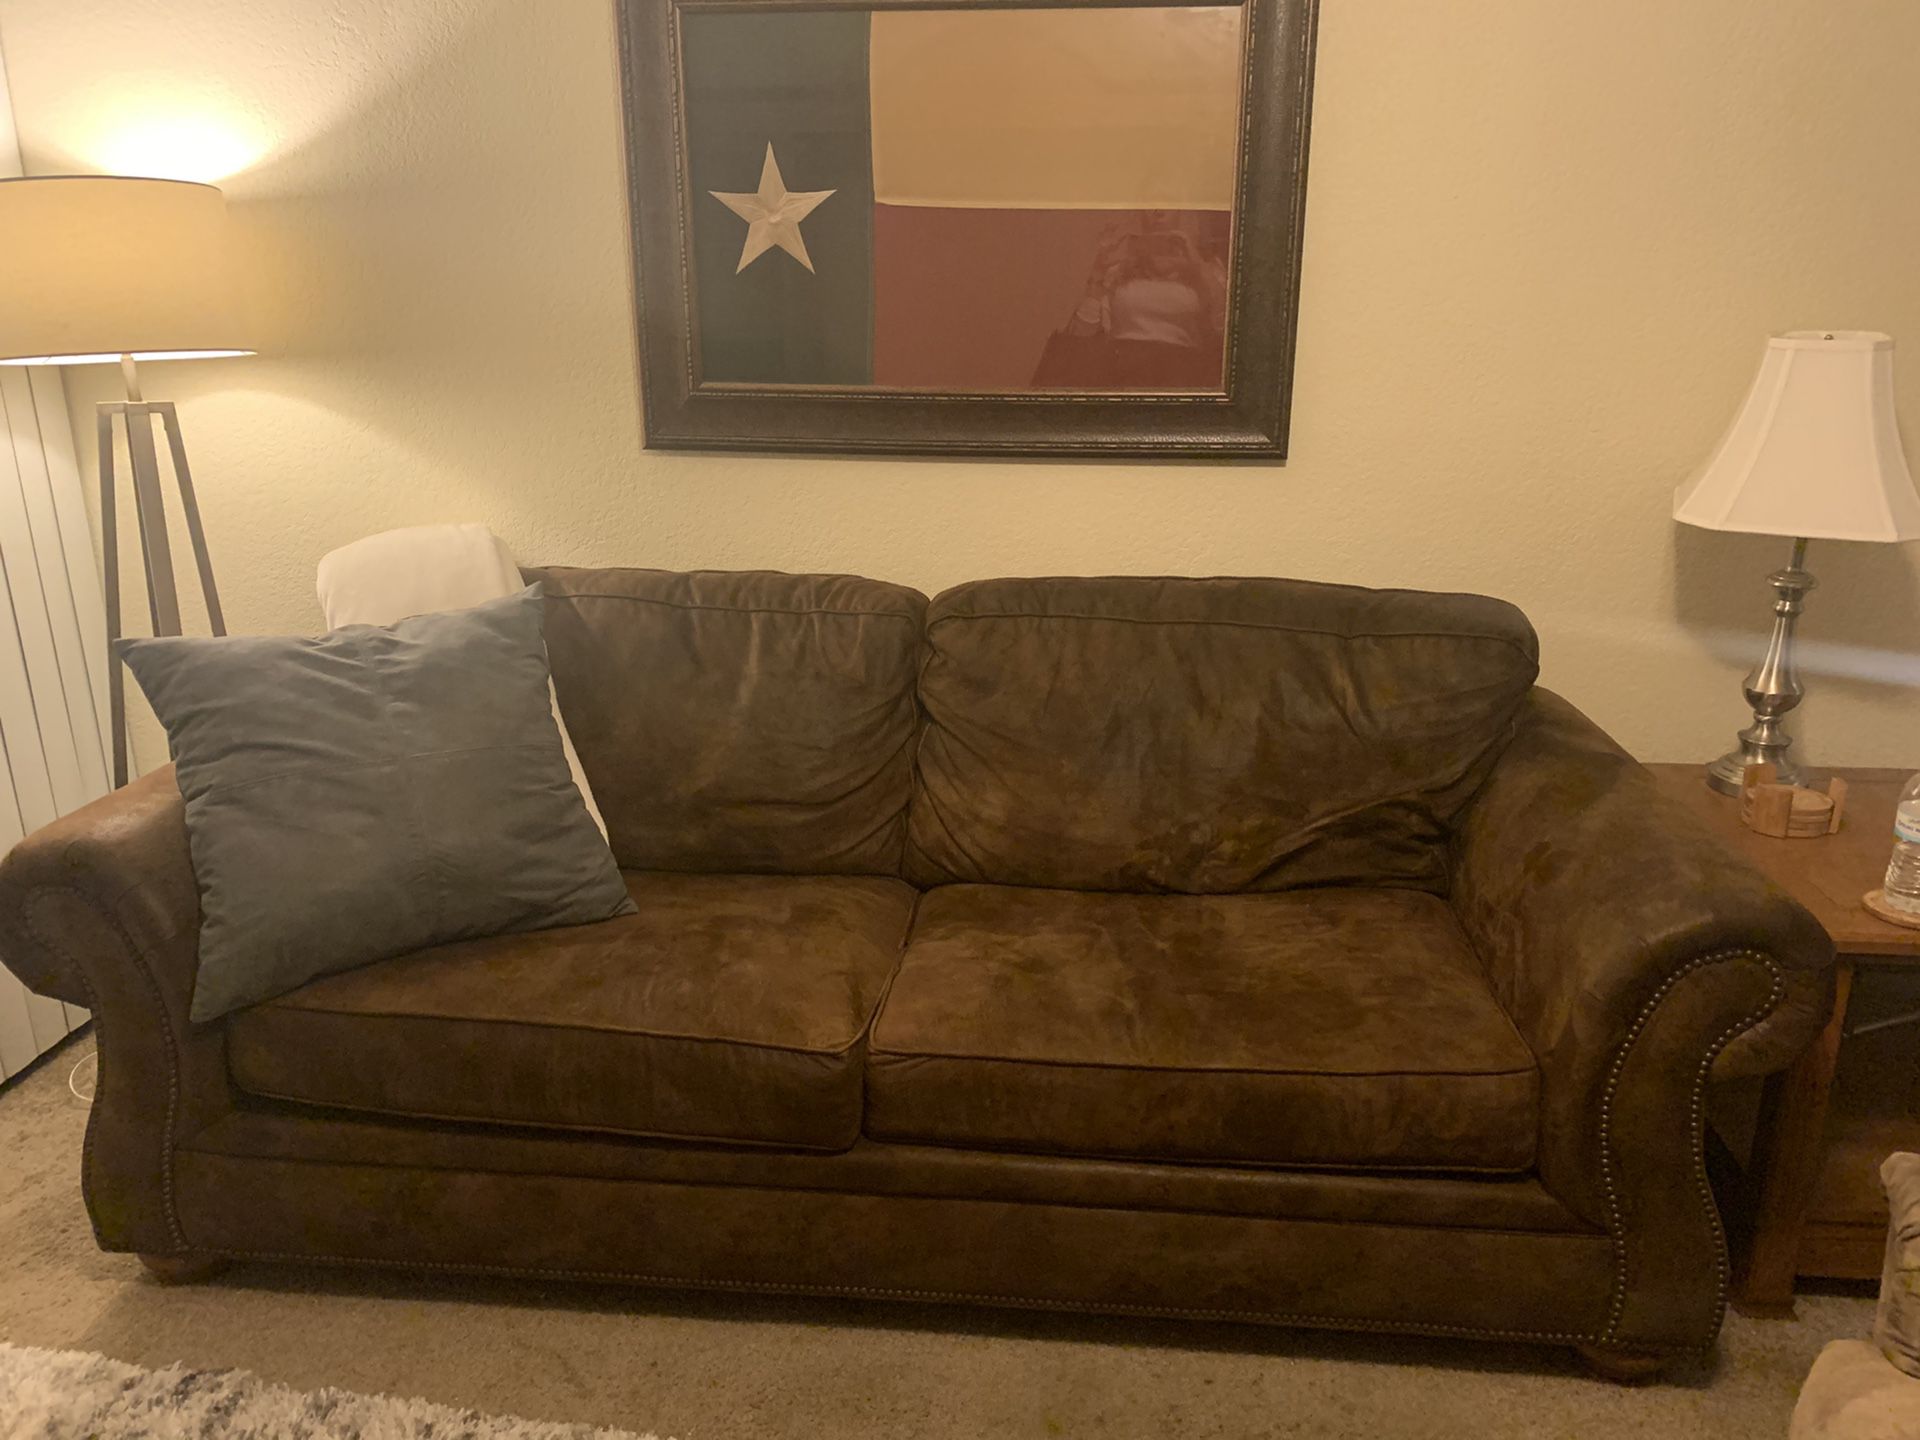 FREE!! Entertainment center, sleeper sofa with Sealy mattress hardly used, two sets of queen mattresses and box springs,